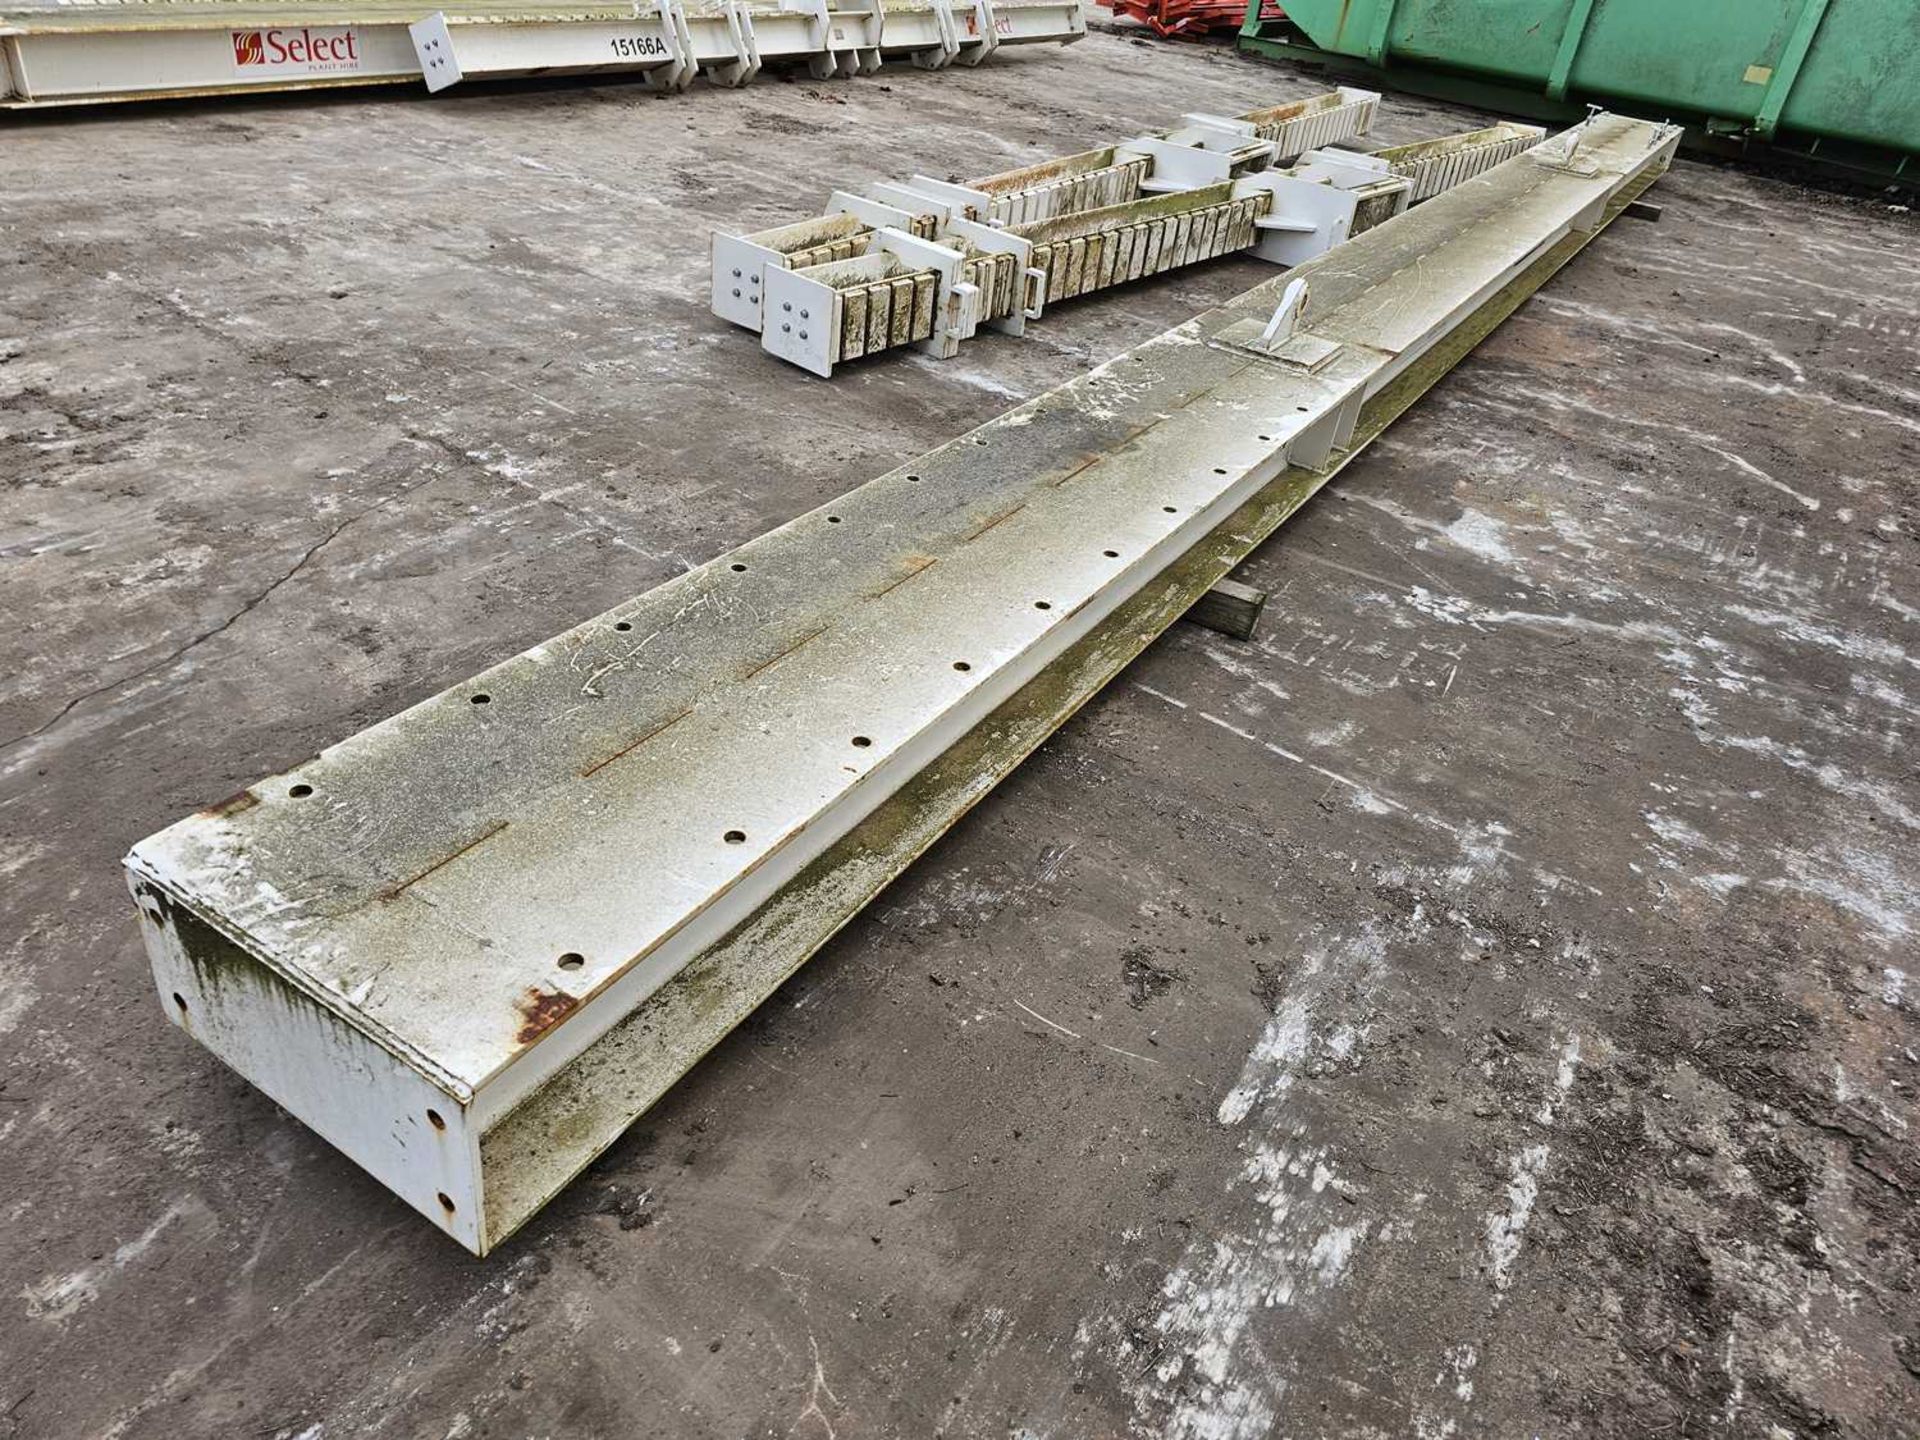 2020 Section Lift 9.7m x 5.8m Adjustable 5.5 Ton Multi Point Spreader Beam - Image 2 of 7